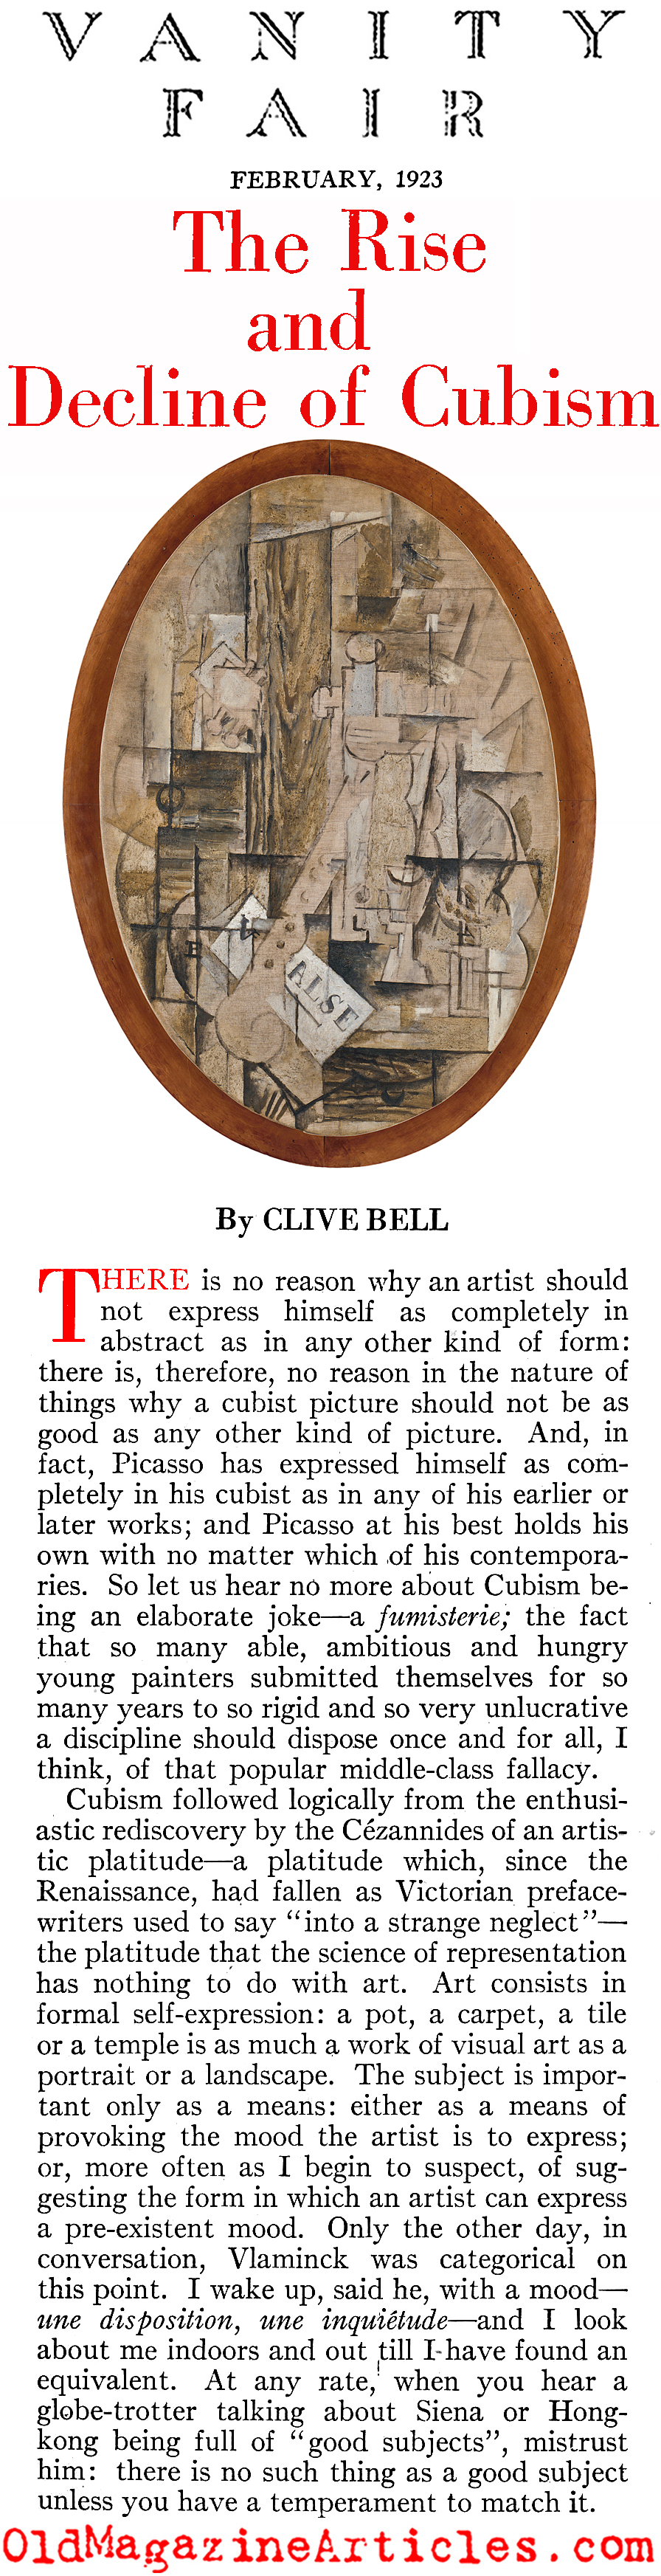 The Rise and Fall of Cubism (Vanity fair, 1923)